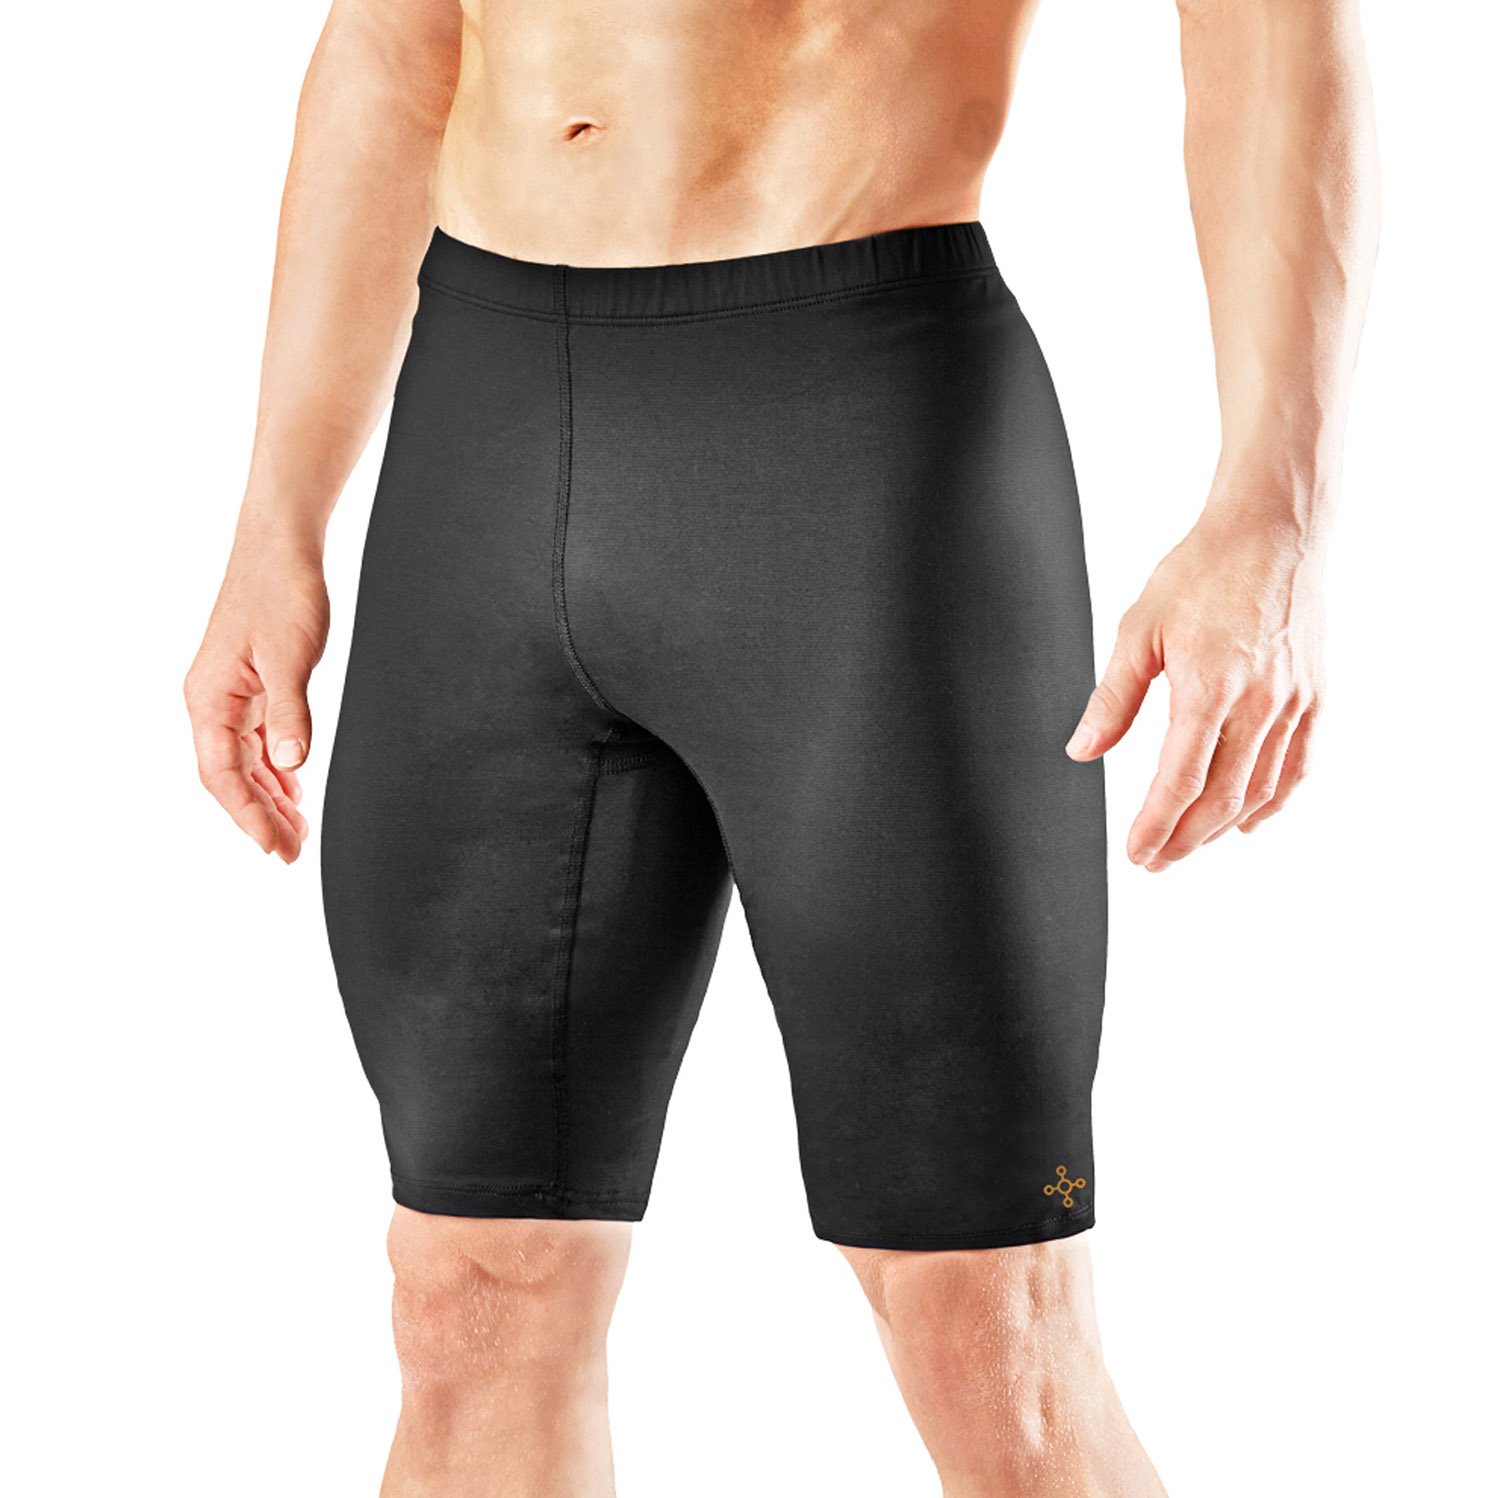 Tommie Copper Men S Compression Running Shorts